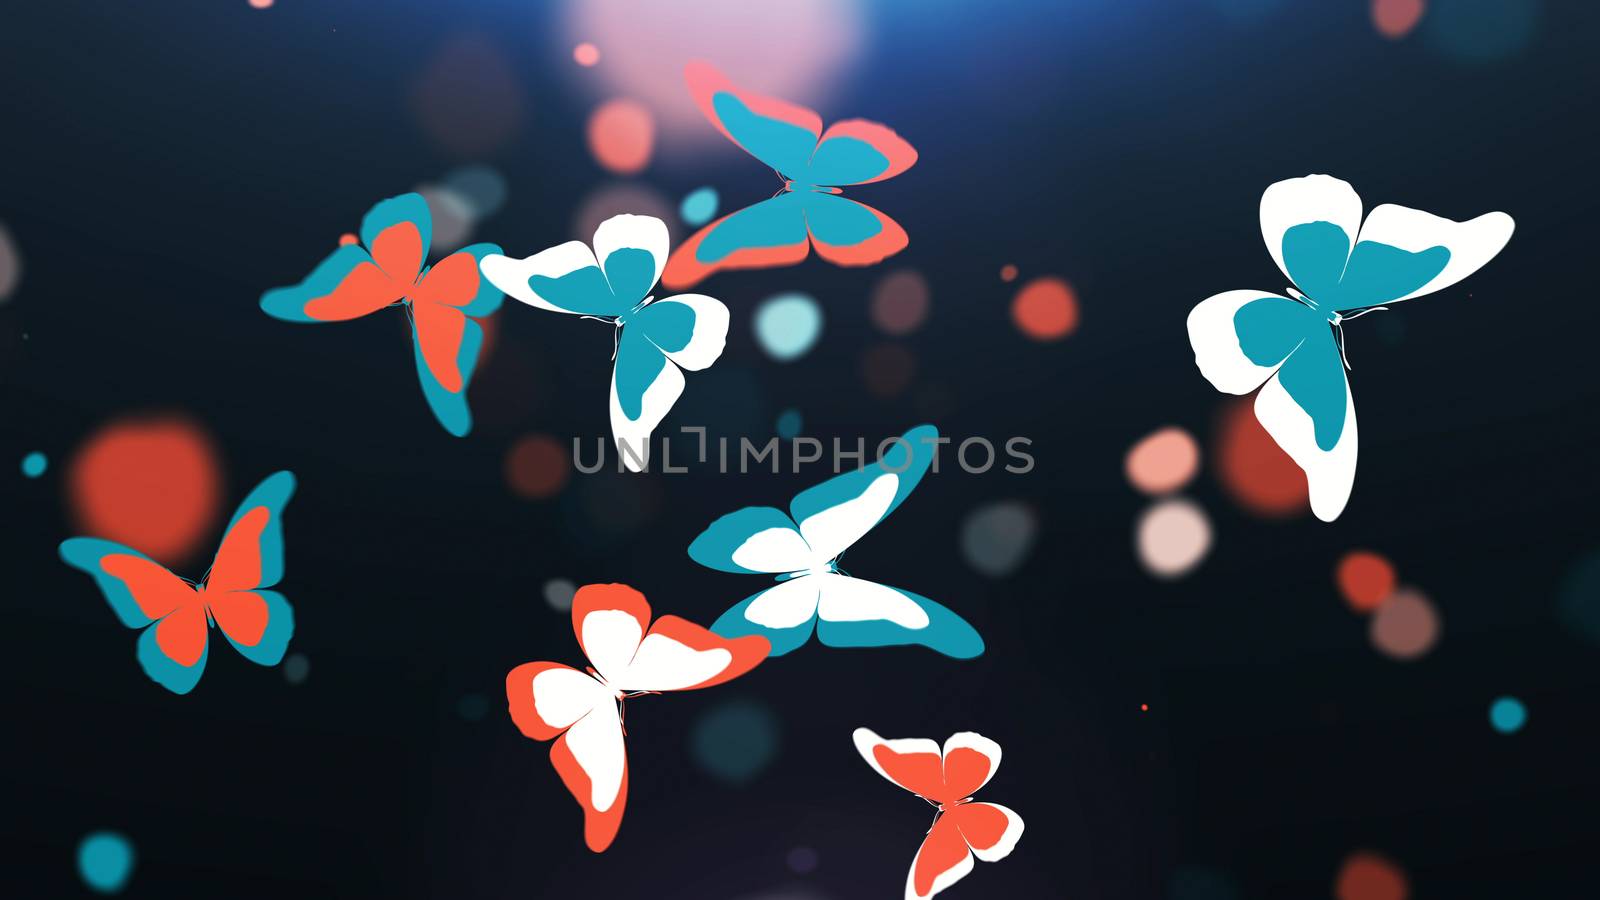 Splenid 3D illustration of the blue and red and white butterflues in the black background with tender looking wings. The butterflies look simplistic and impressive